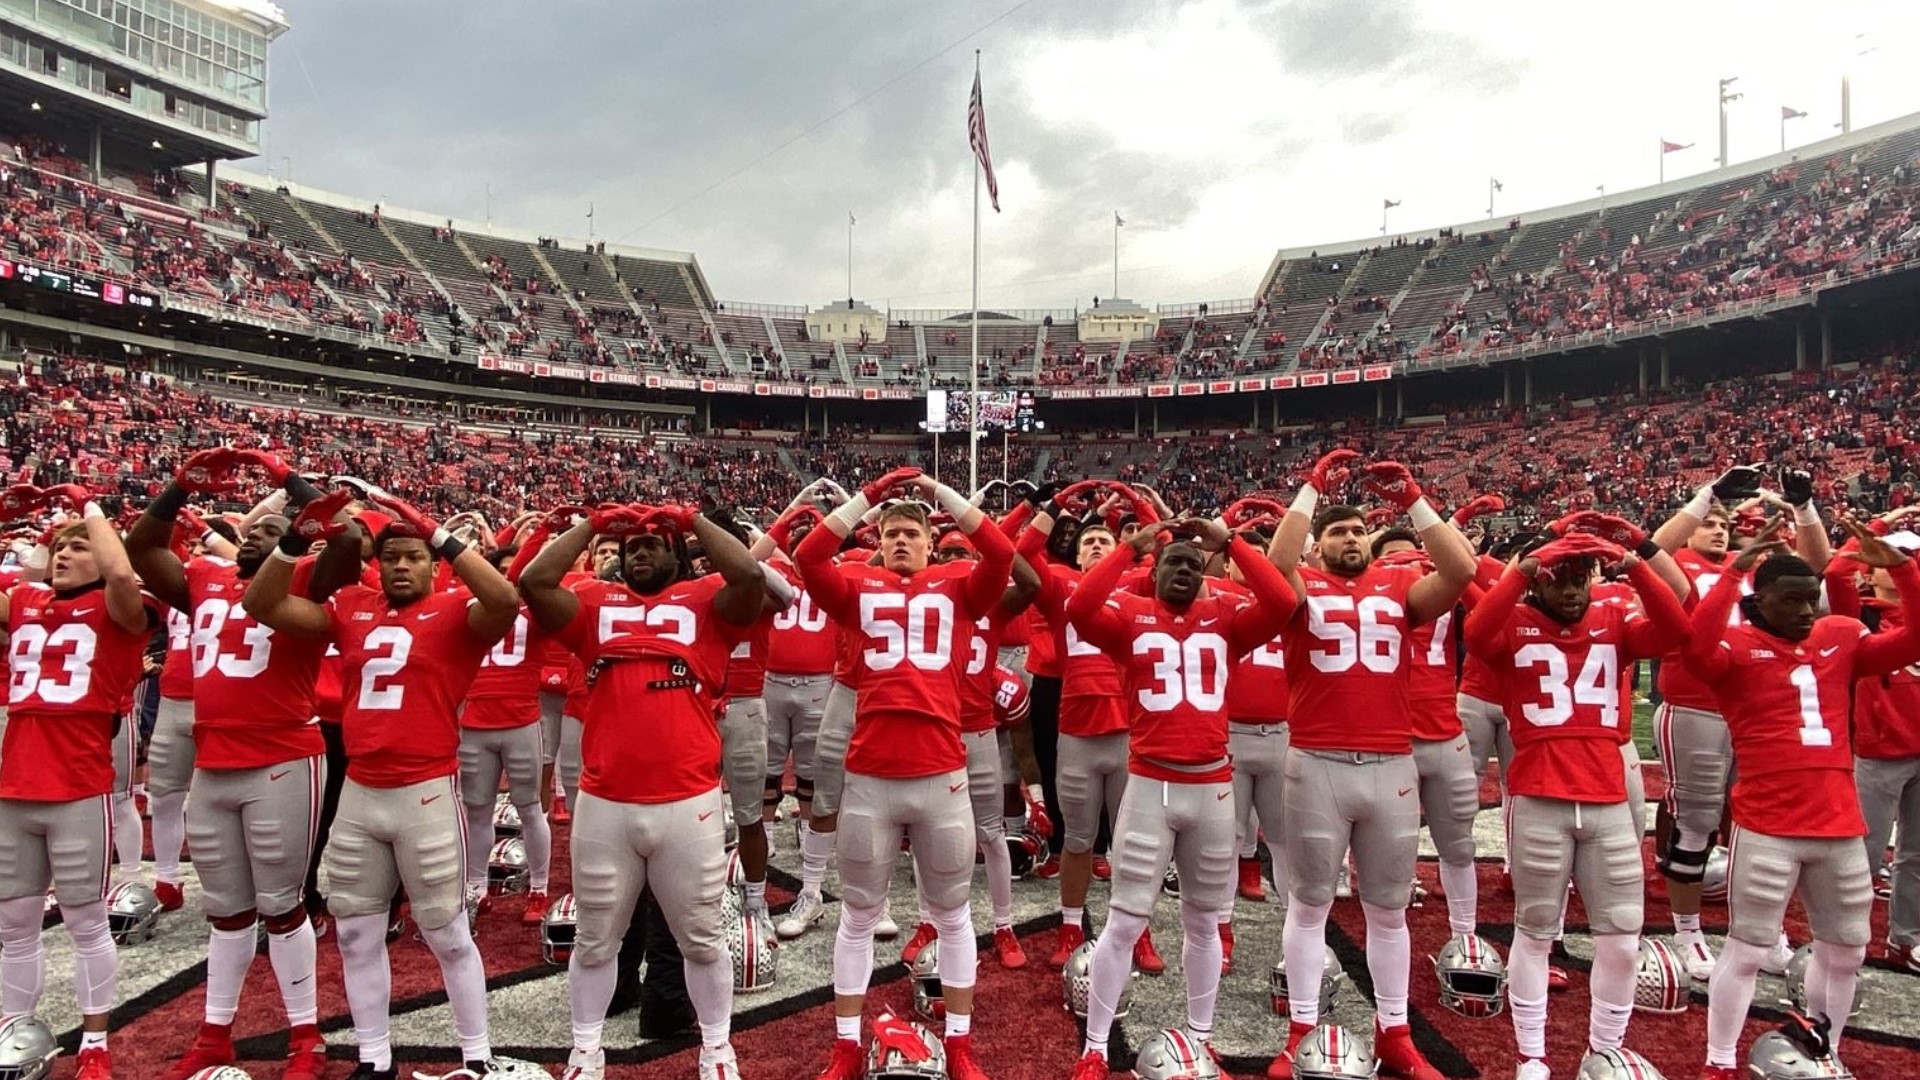 The Ohio State Buckeyes sing ‘Carmen Ohio’ in the south end of The ‘Shoe after the team’s 56-7 win over Michigan State.